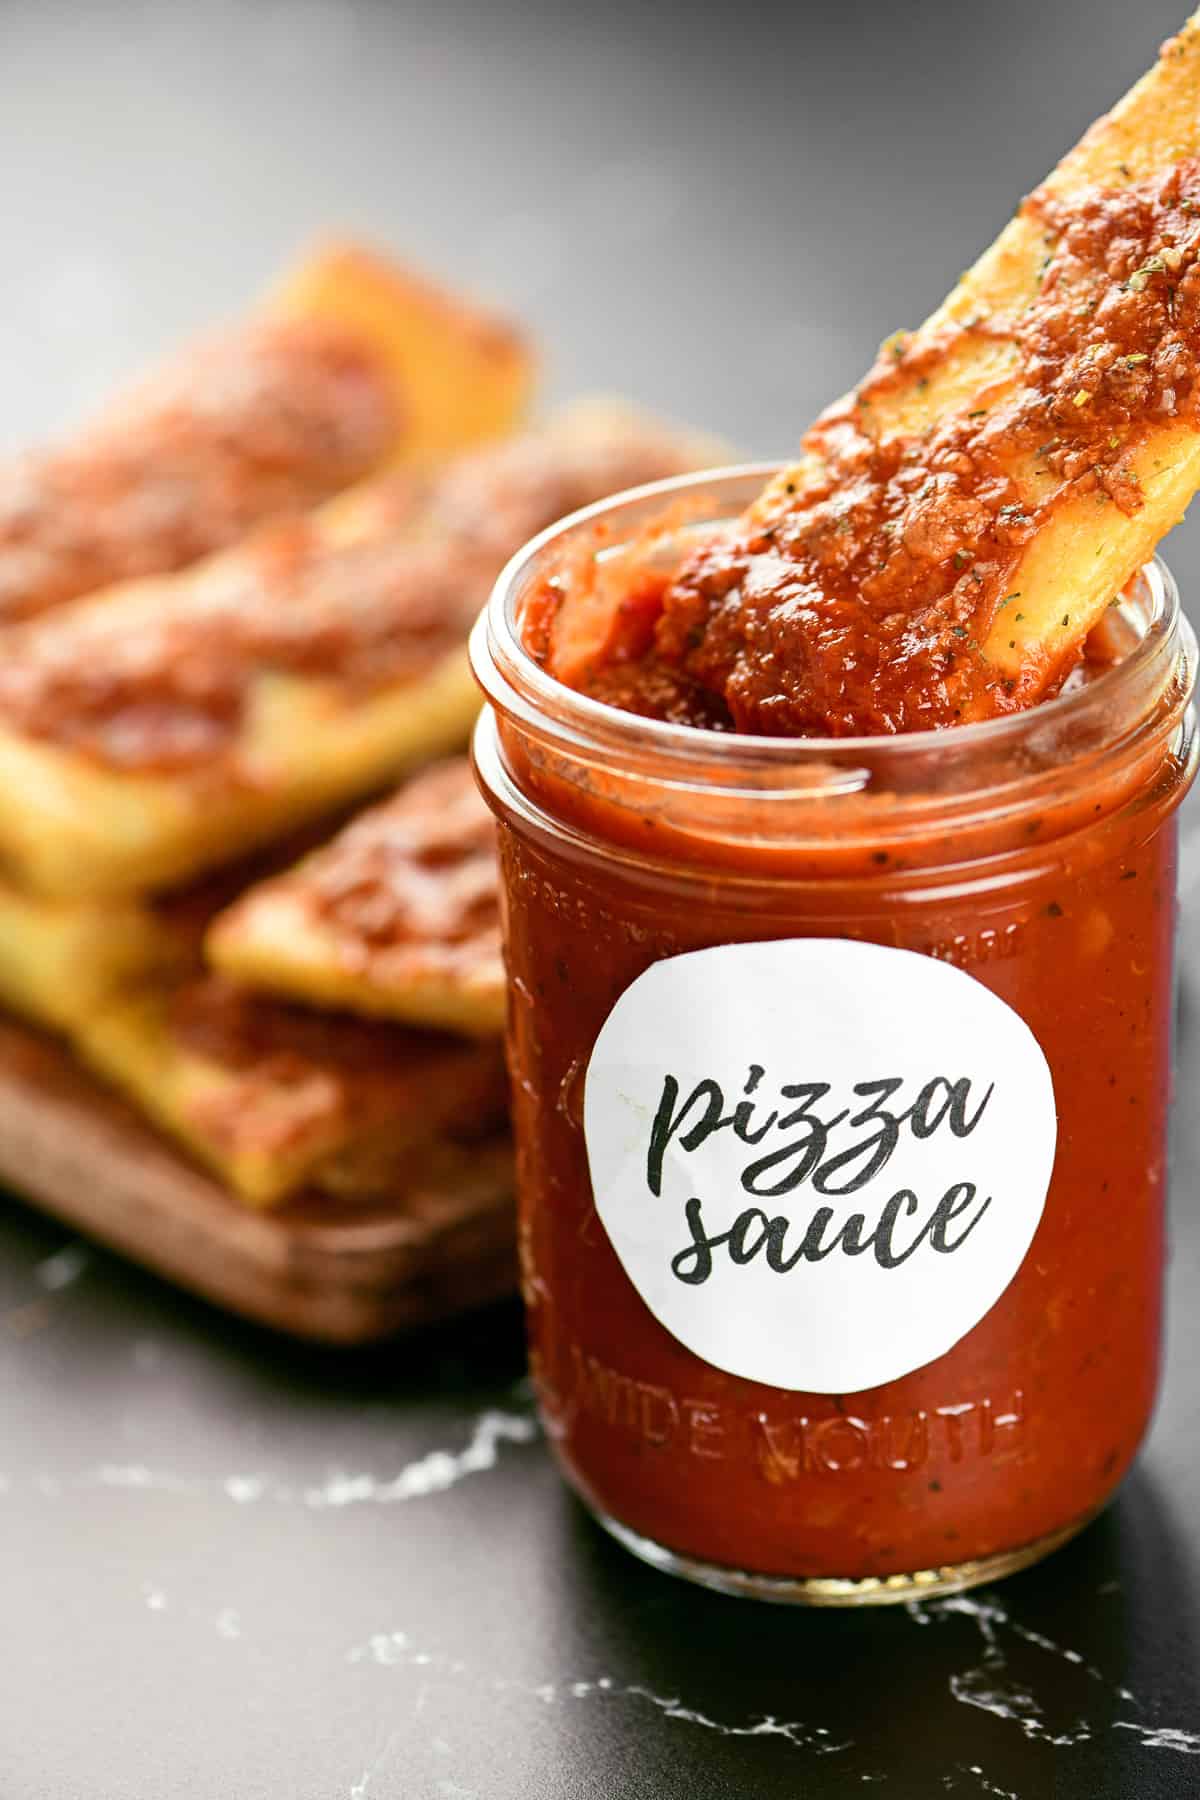 A pizza stick is dipped into a jar of pizza sauce.